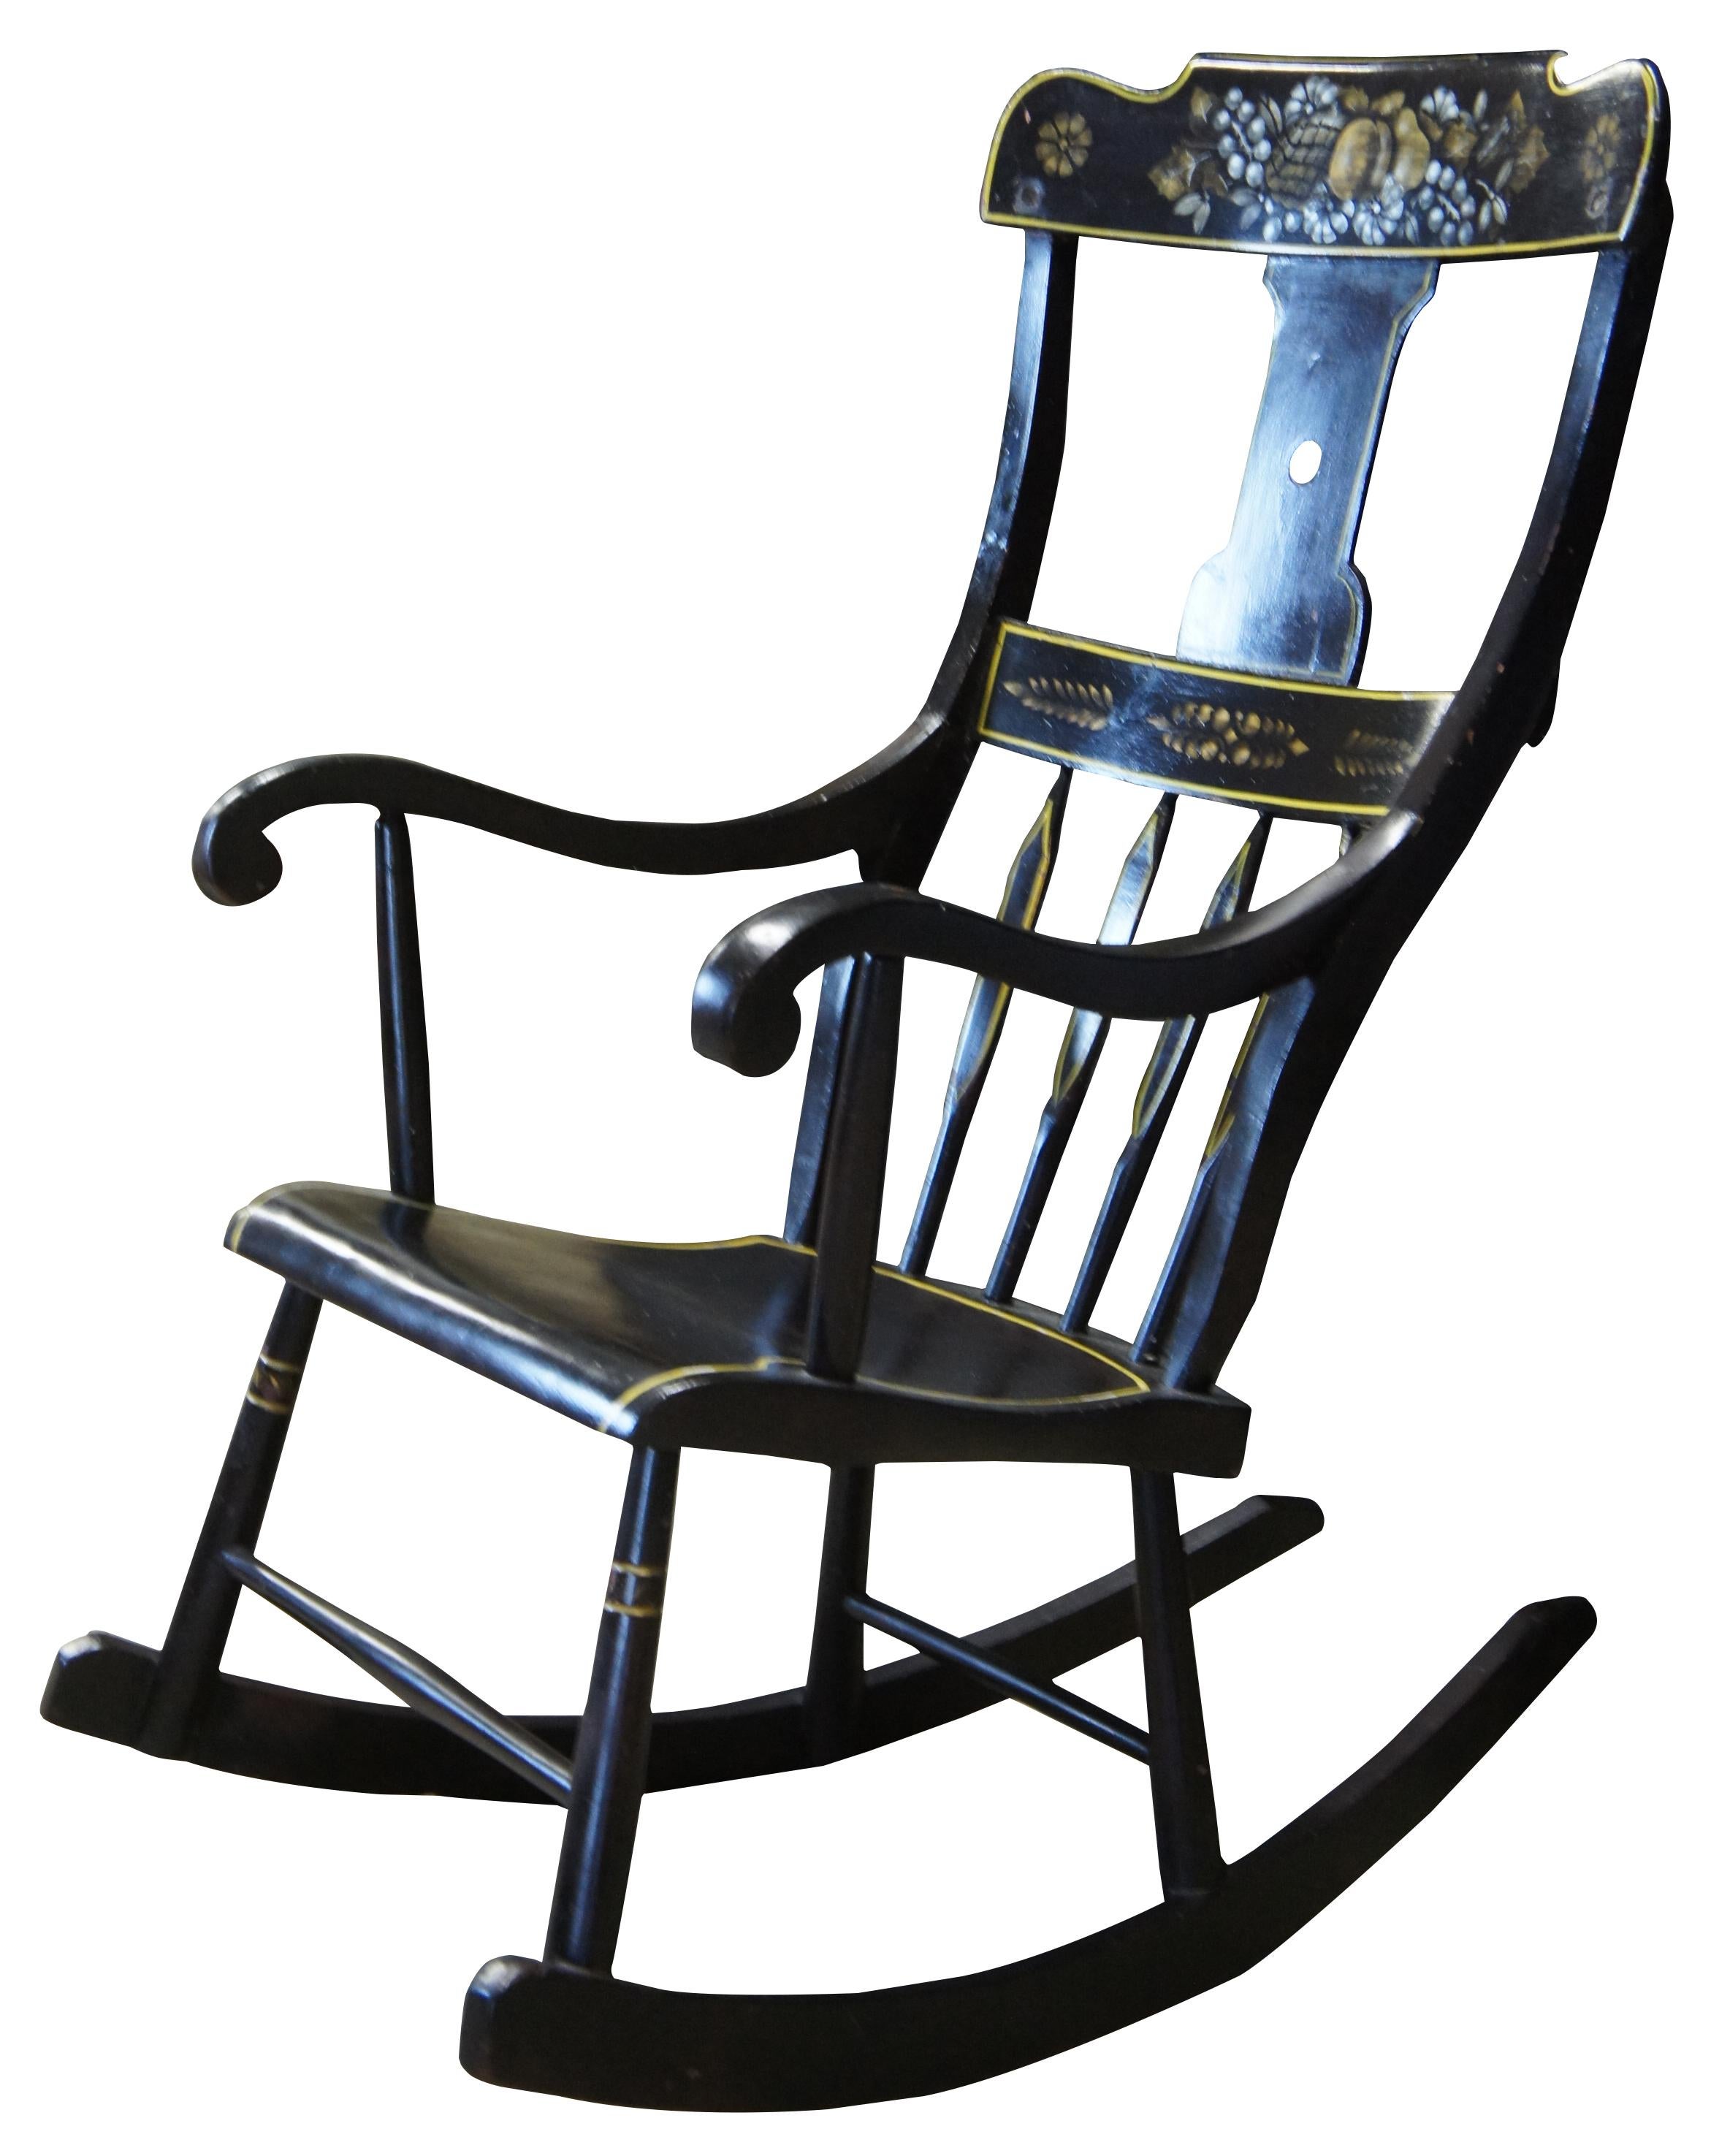 Antique 19th century Boston rocker. Features a black painted finish with hand stencilled fruit and flower deisgns. Includes a contoured rail over a pierced splat and lower rail over spindles leading to scrolled arms and a shaped seat.
     